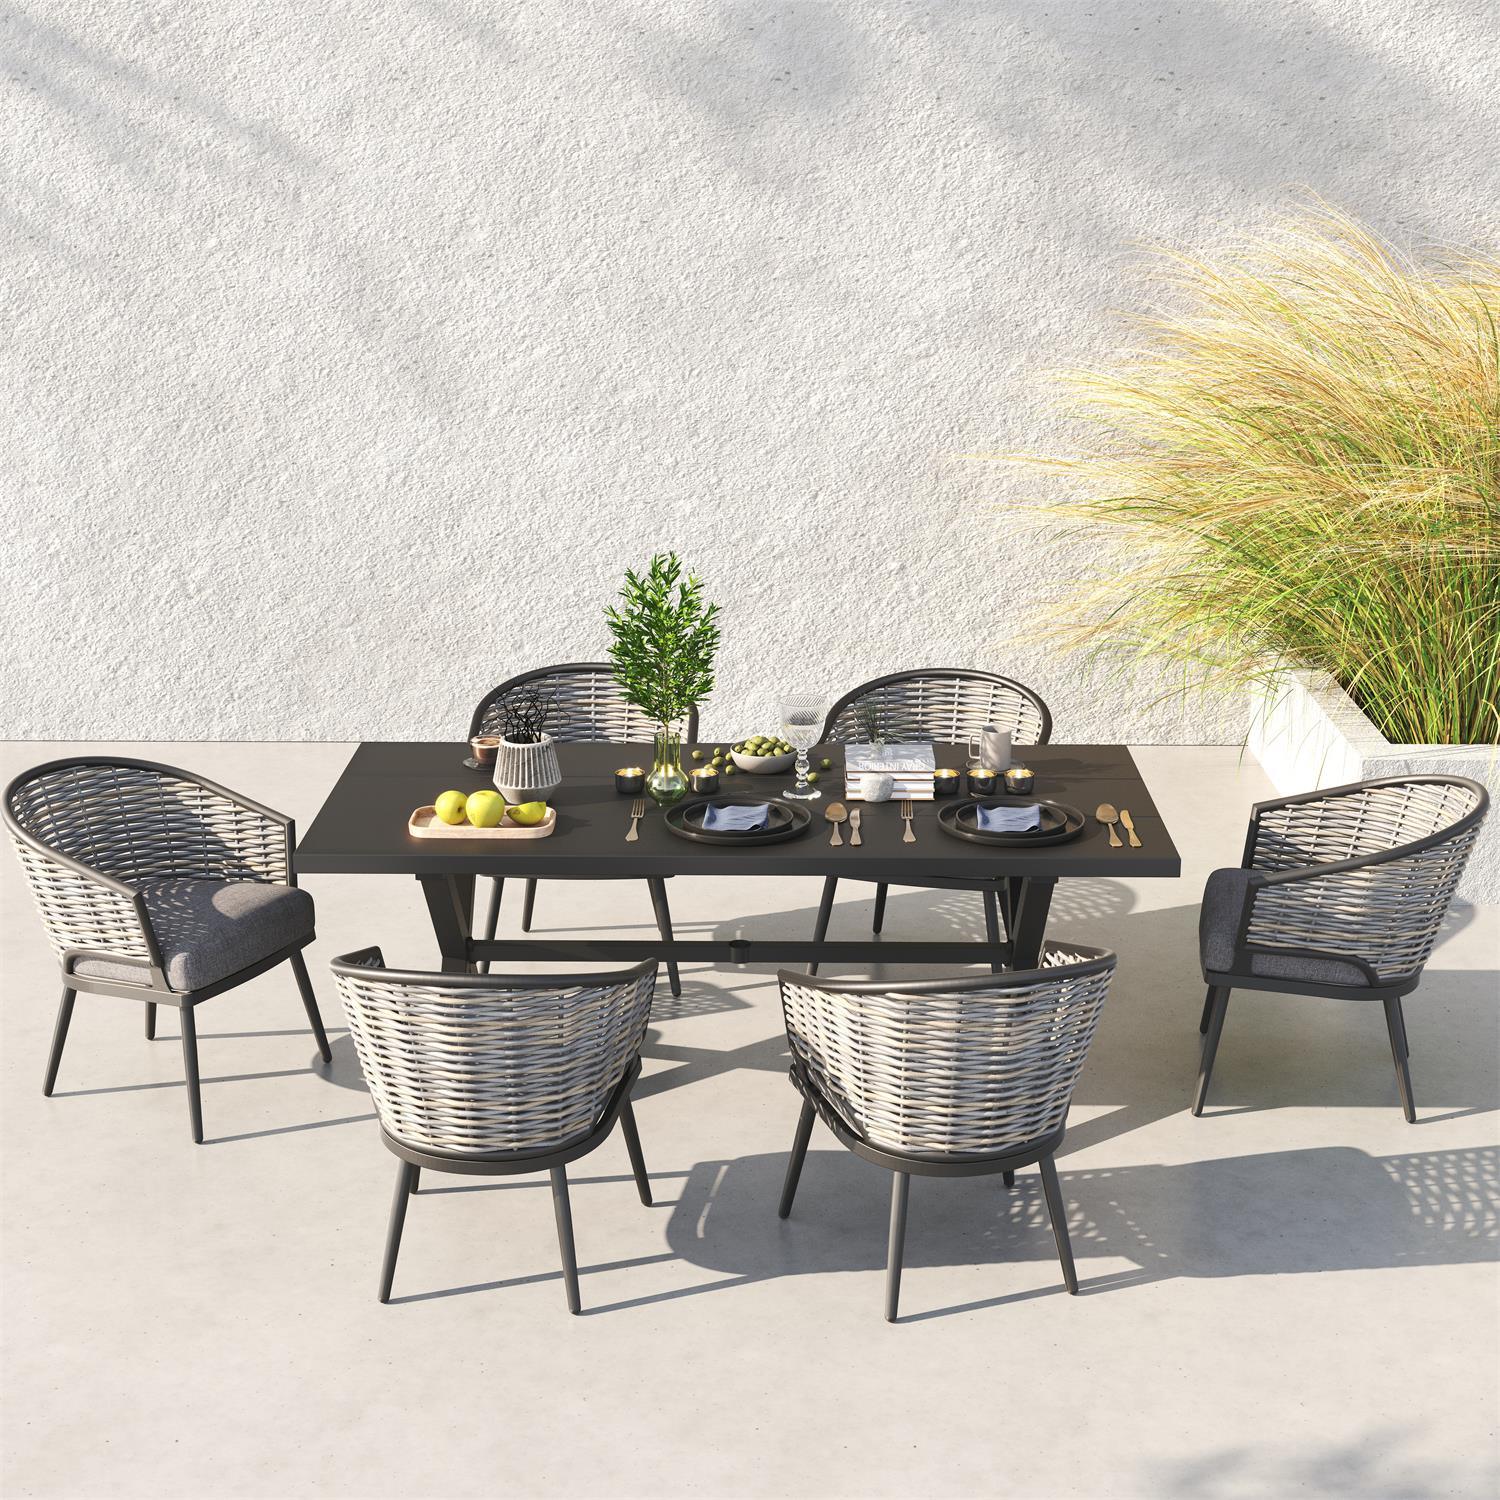 Burano Grey wicker outdoor Dining Set with aluminum frame, grey cushions, 6 chairs , 1 X-Shaped Table - Jardina Furniture - 2